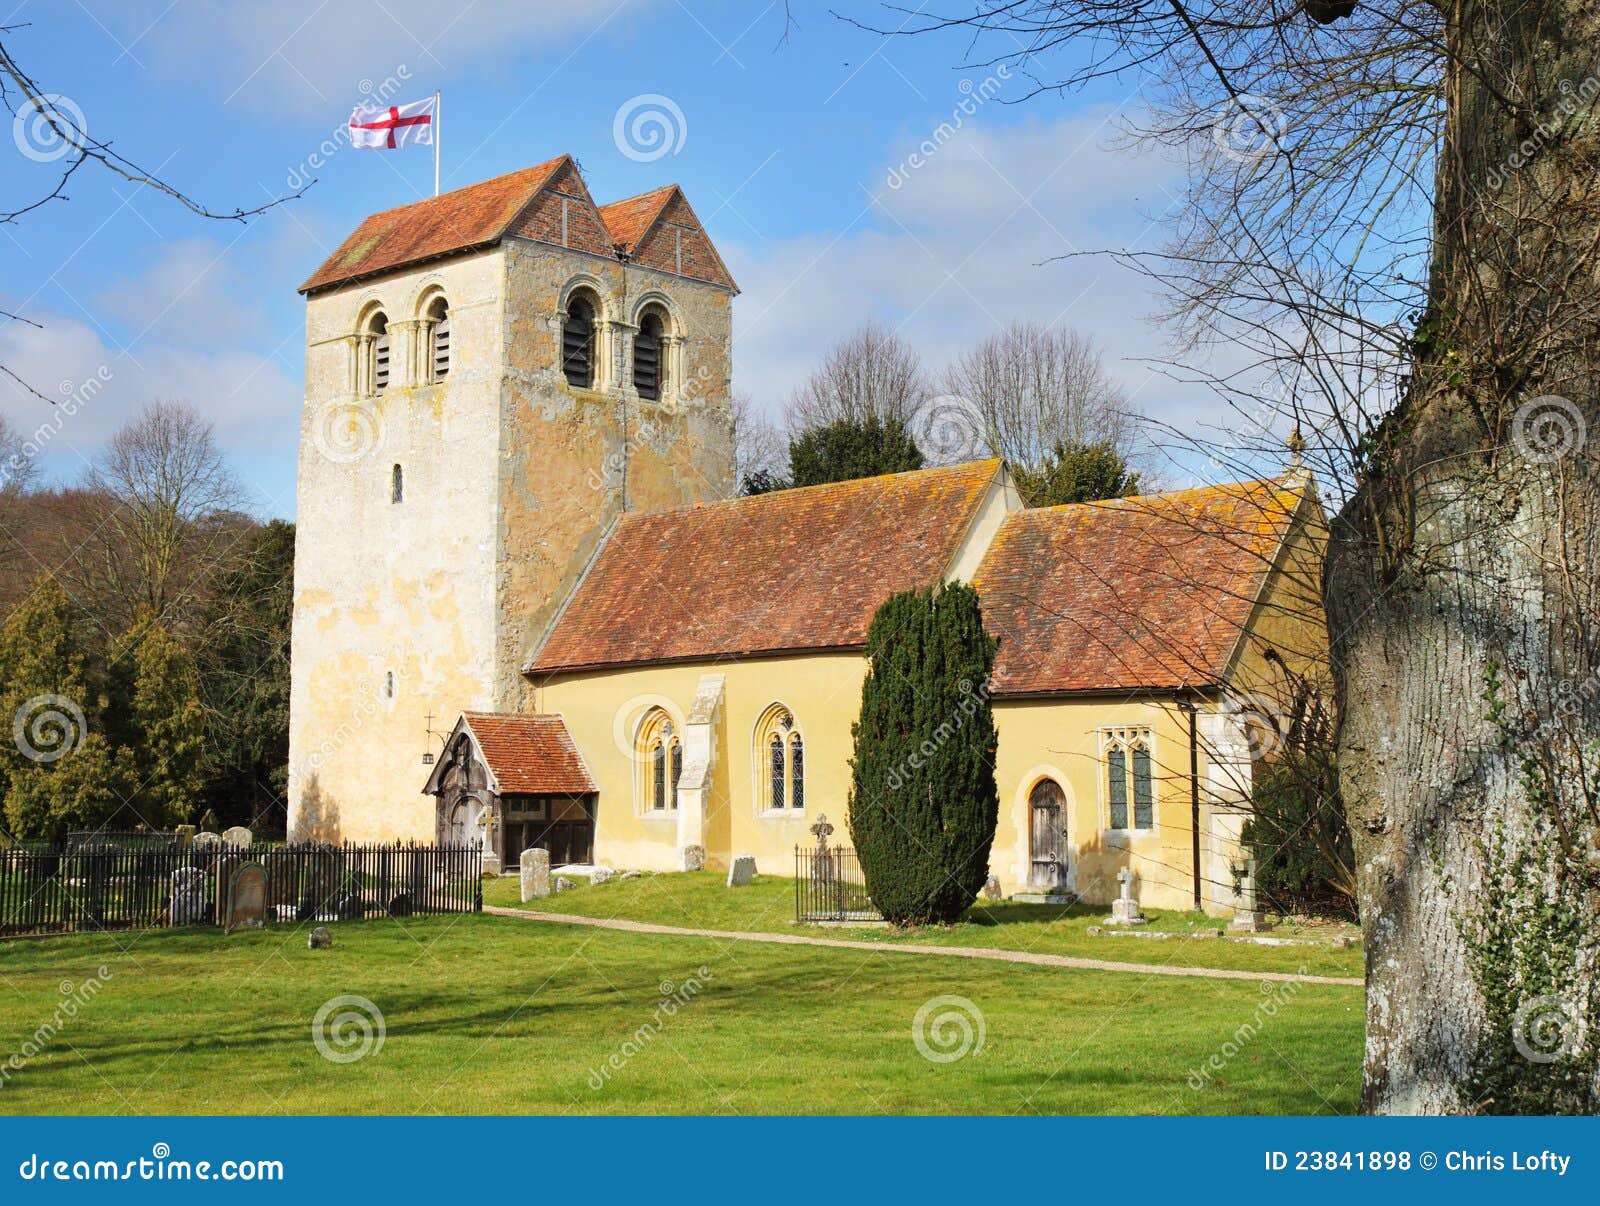 Medieval English Village Church And Tower Royalty Free Stock Photos